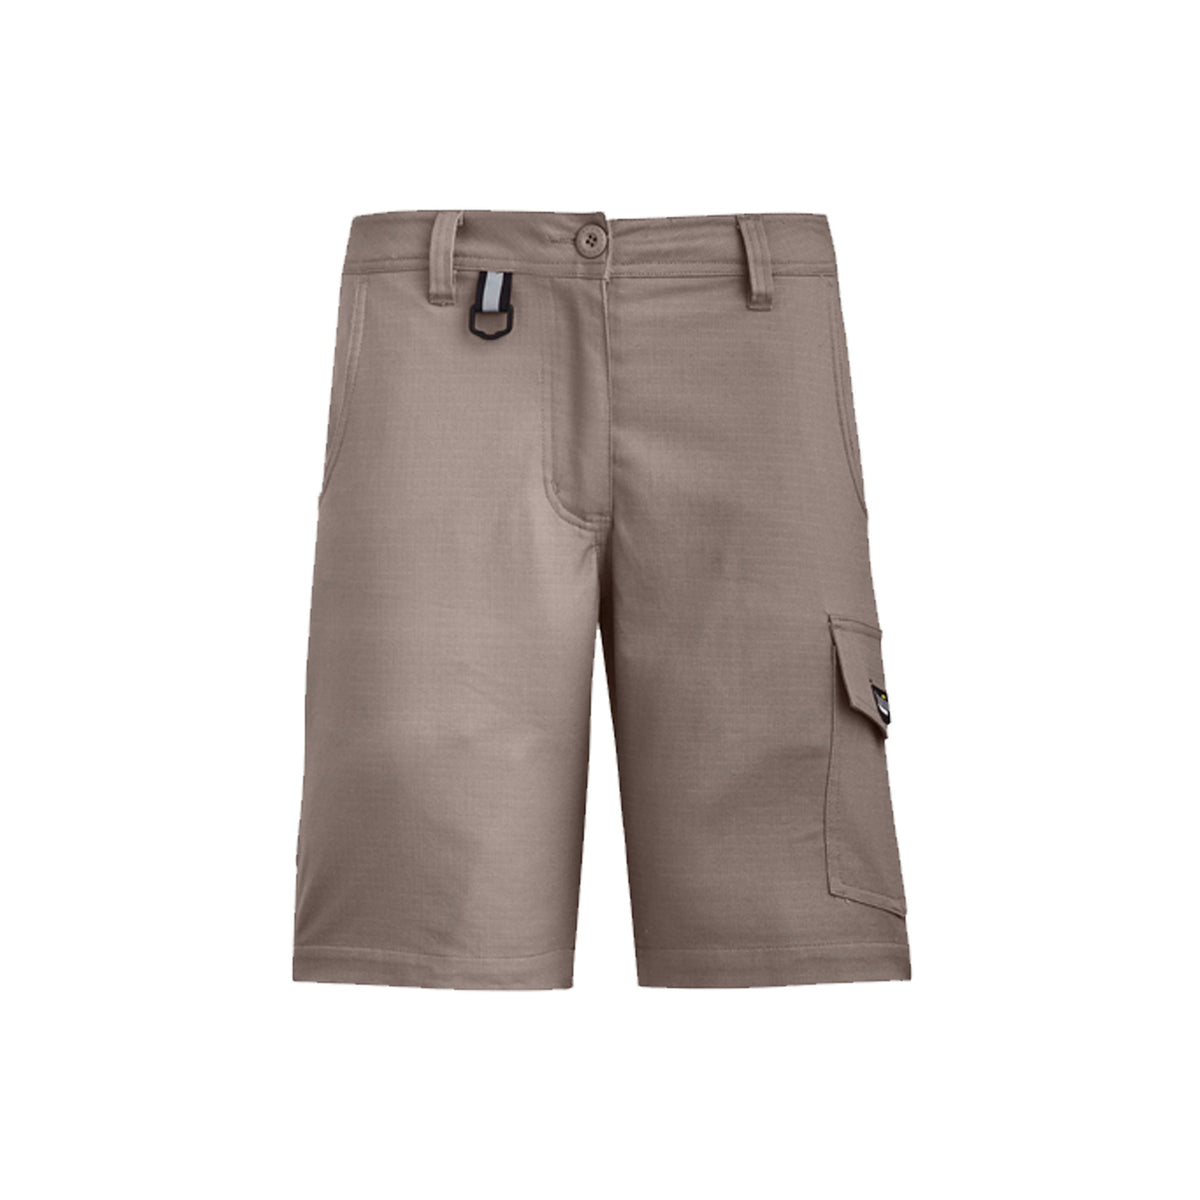 ladies rugged cooling venting shorts in khaki